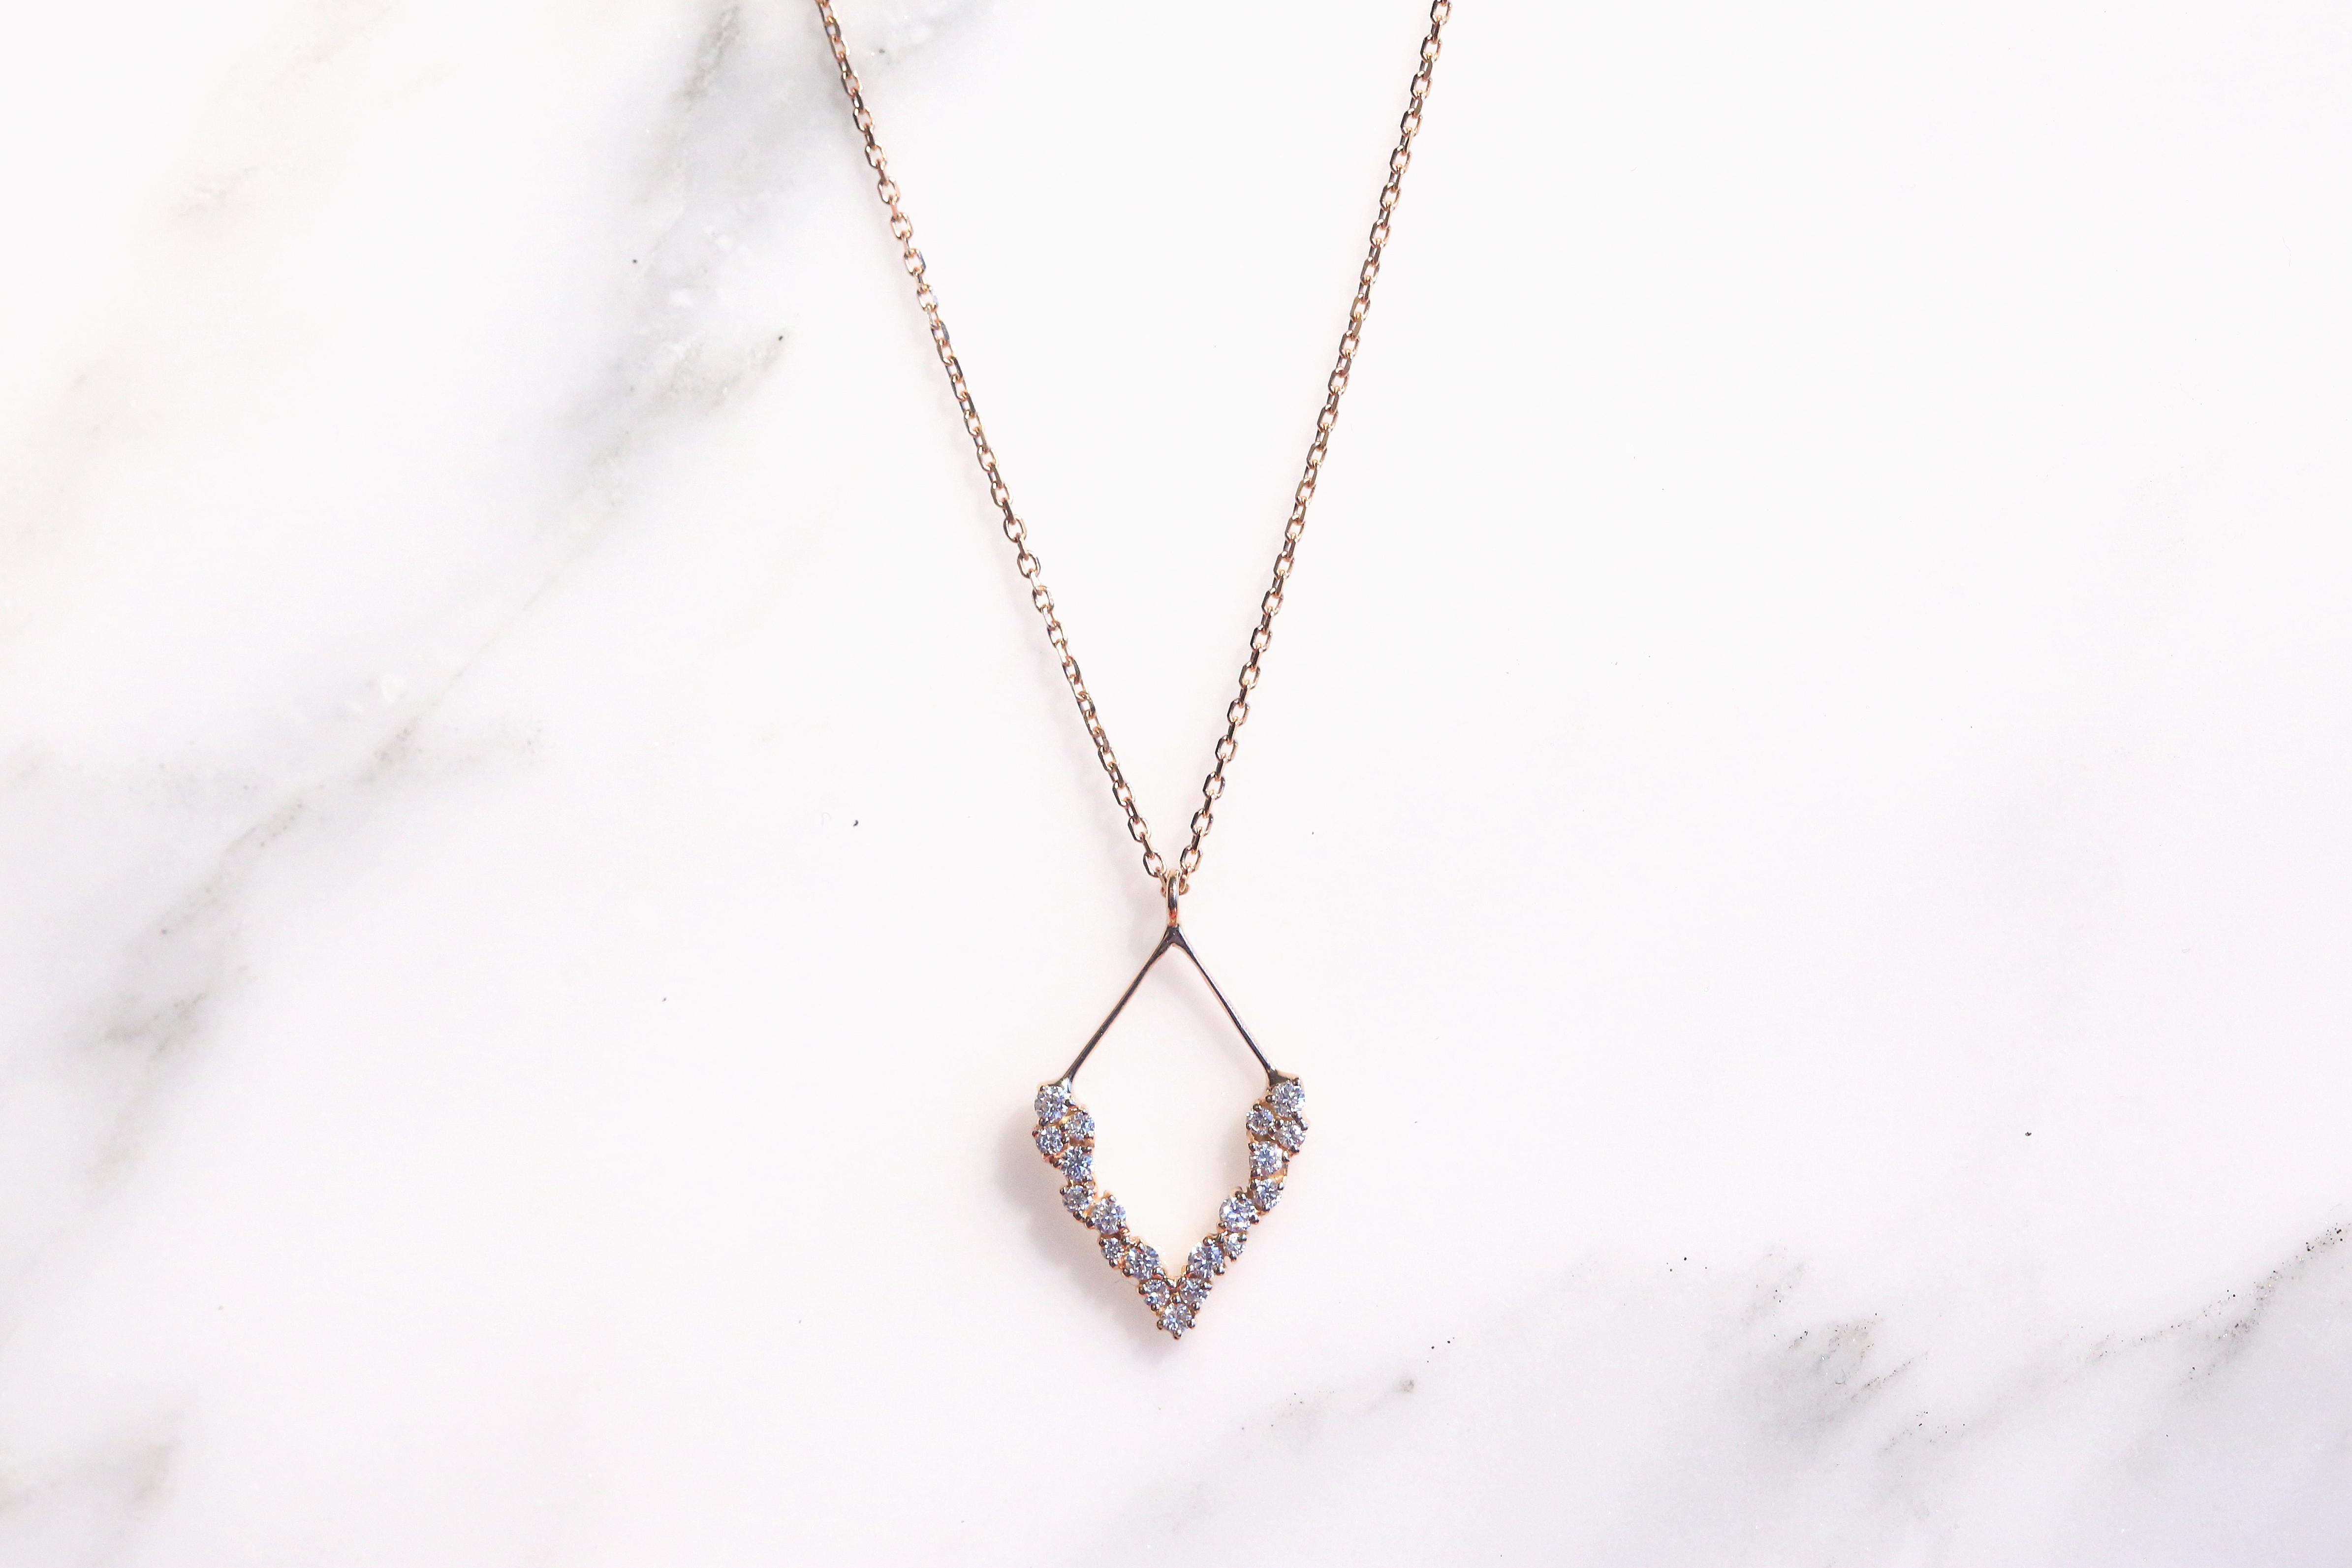 The Half Dream Diamonds necklace features 0.30ct of white diamonds set in 18k gold.